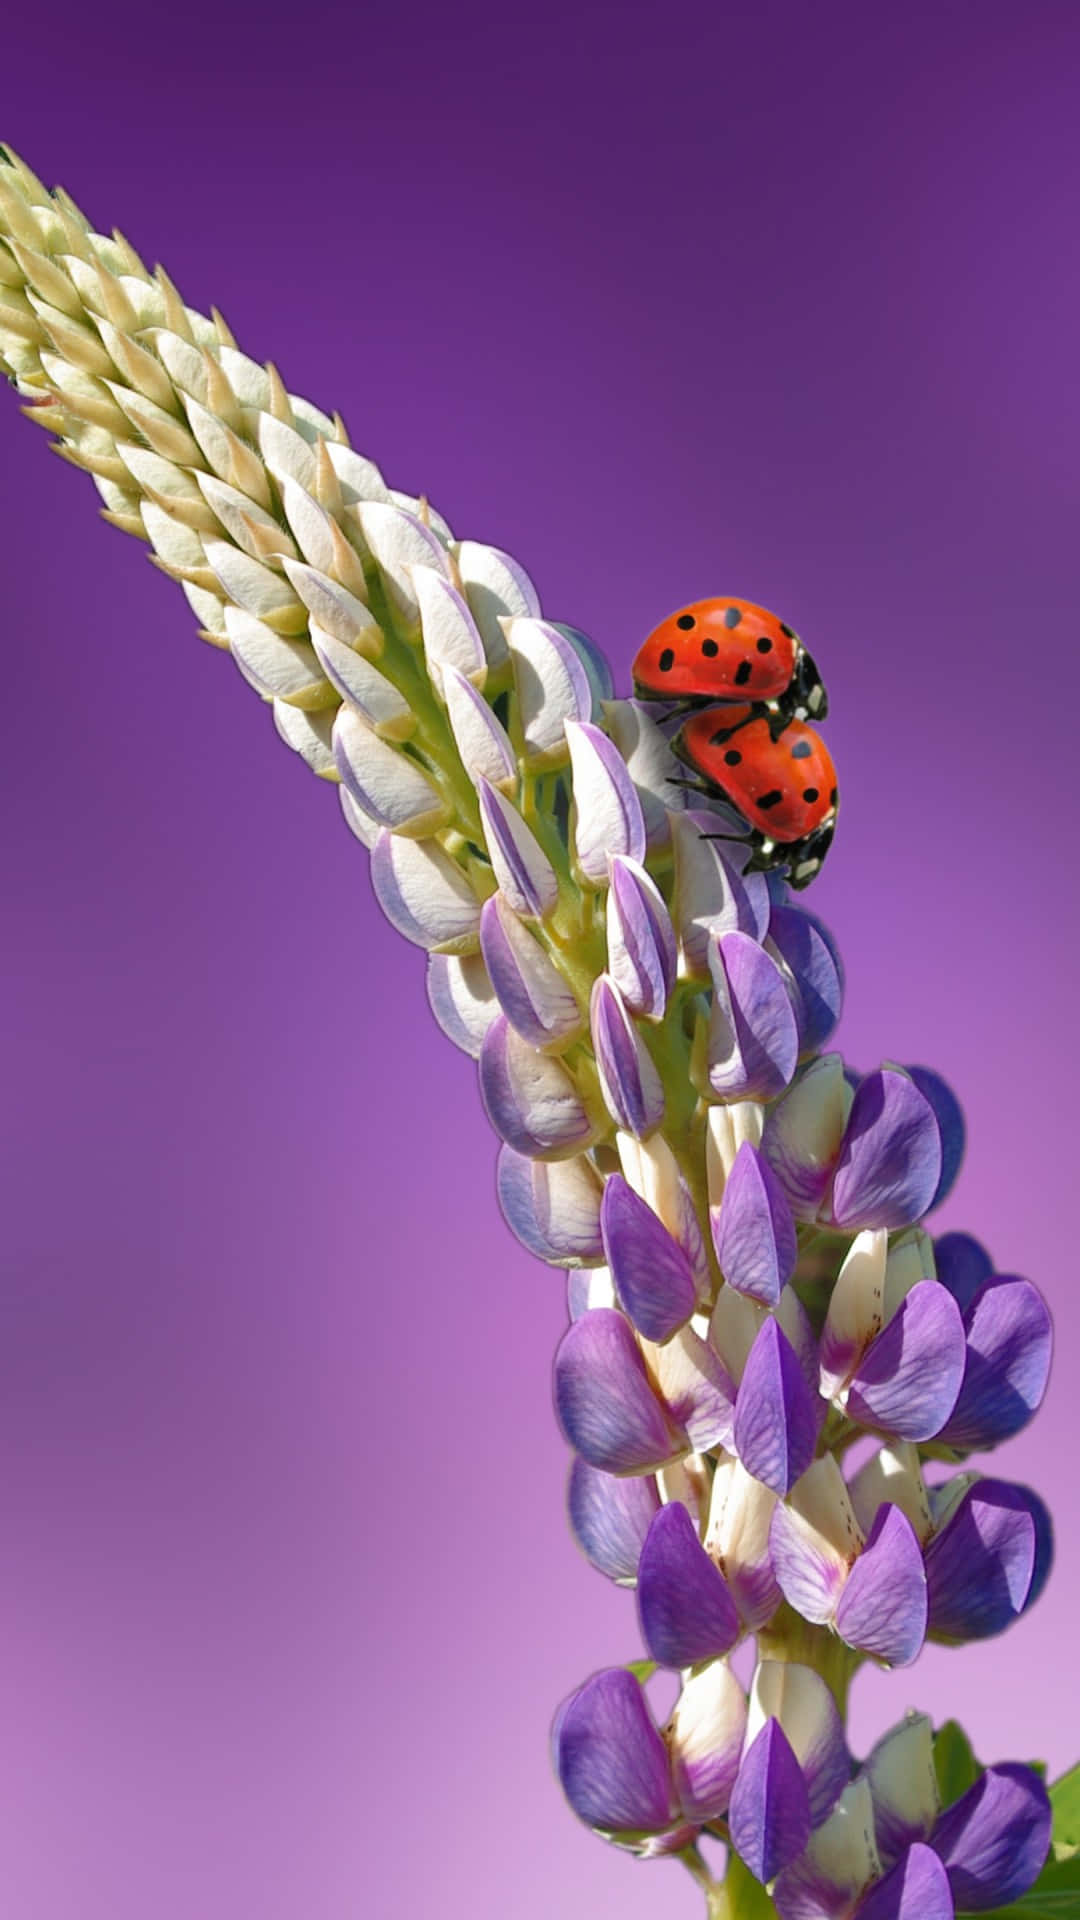 A cute ladybug perched on an iPhone Wallpaper